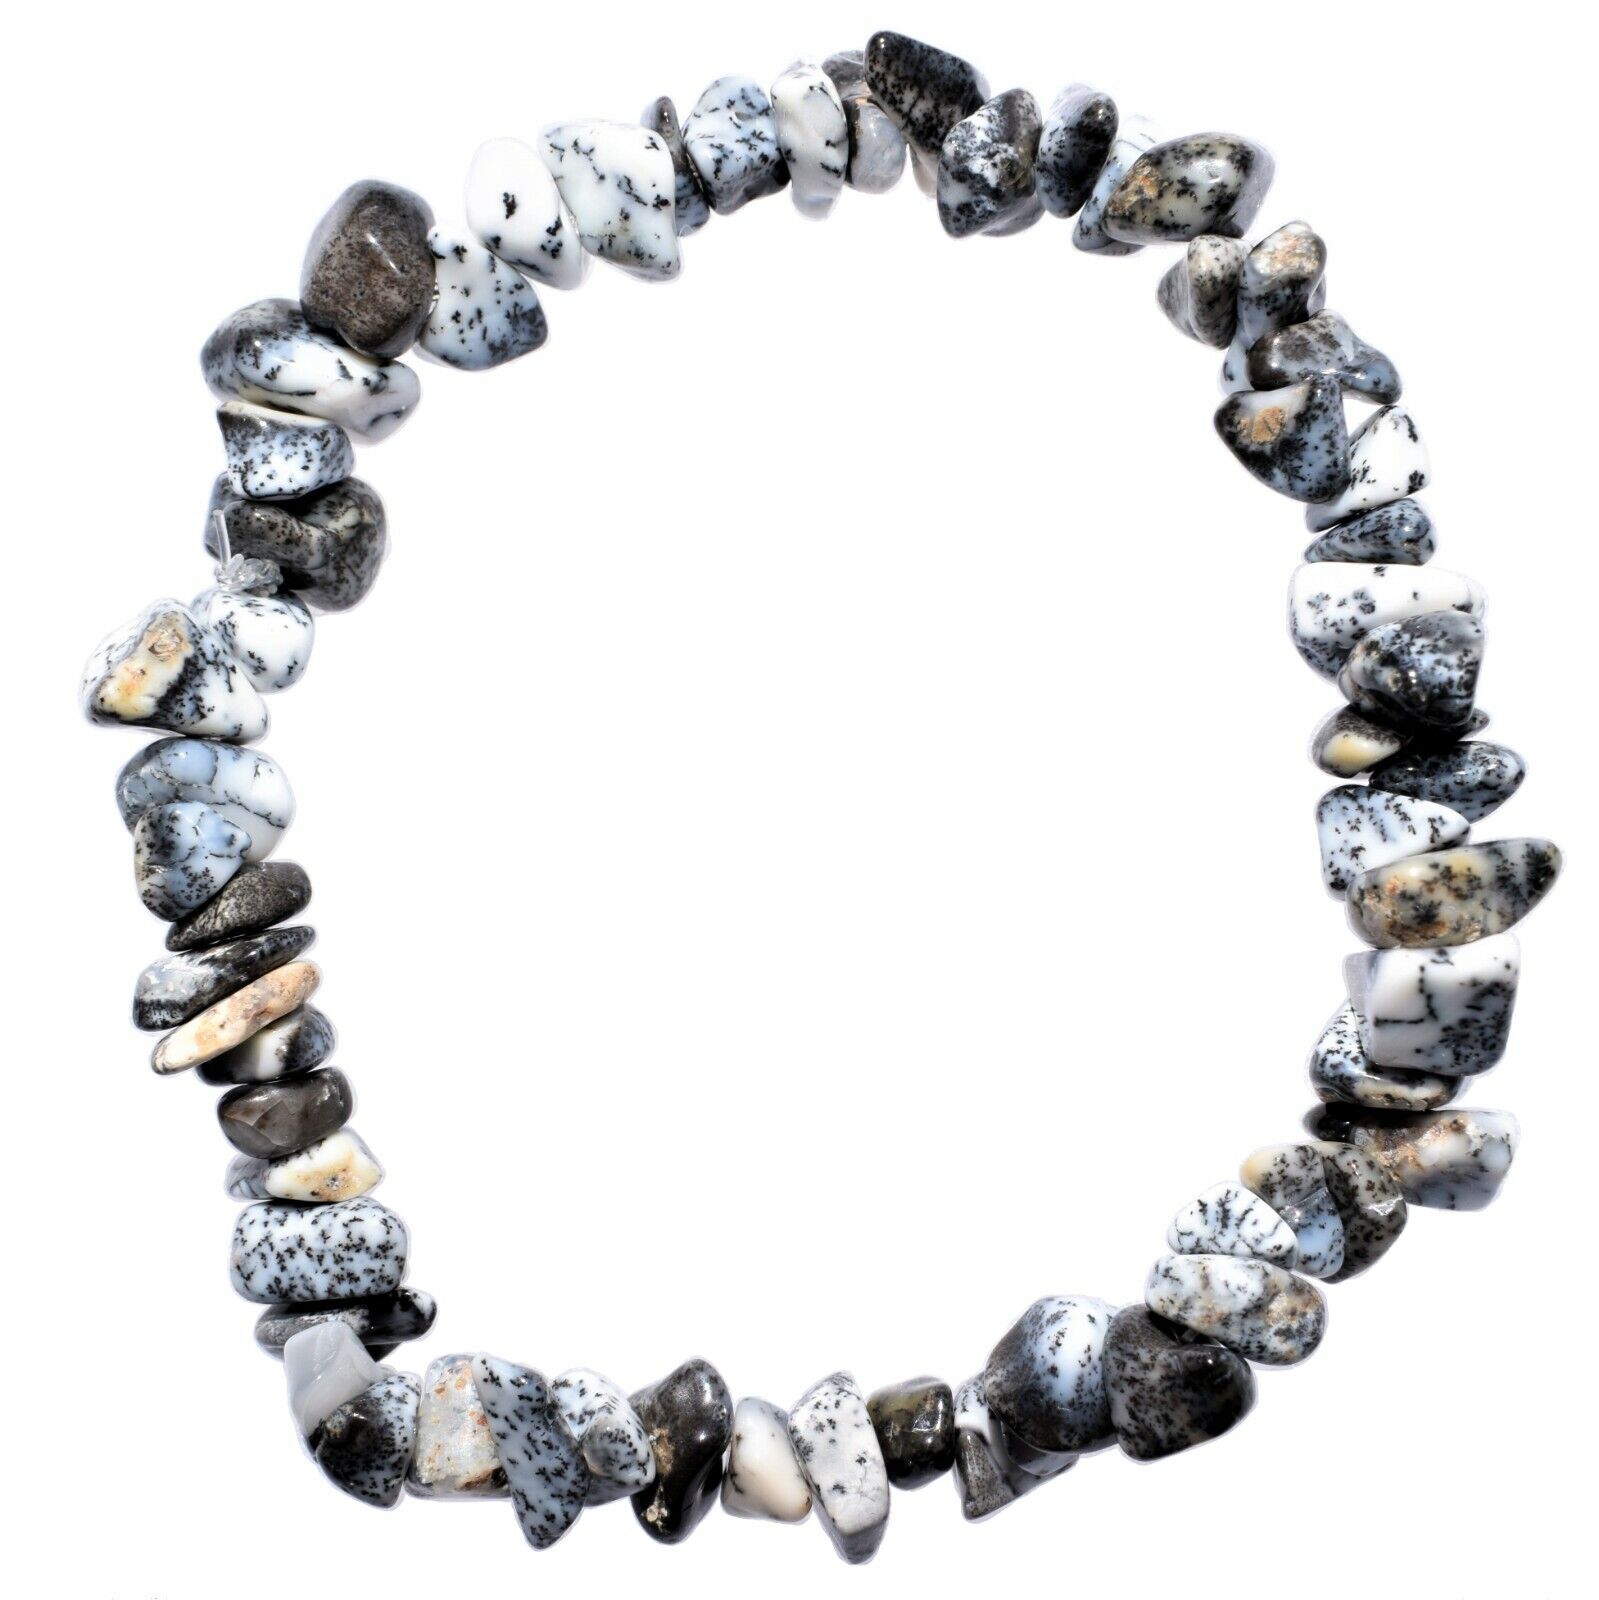 Premium Natural Dendritic Opal Crystal Chip Stretchy Bracelet - Selenite Charged